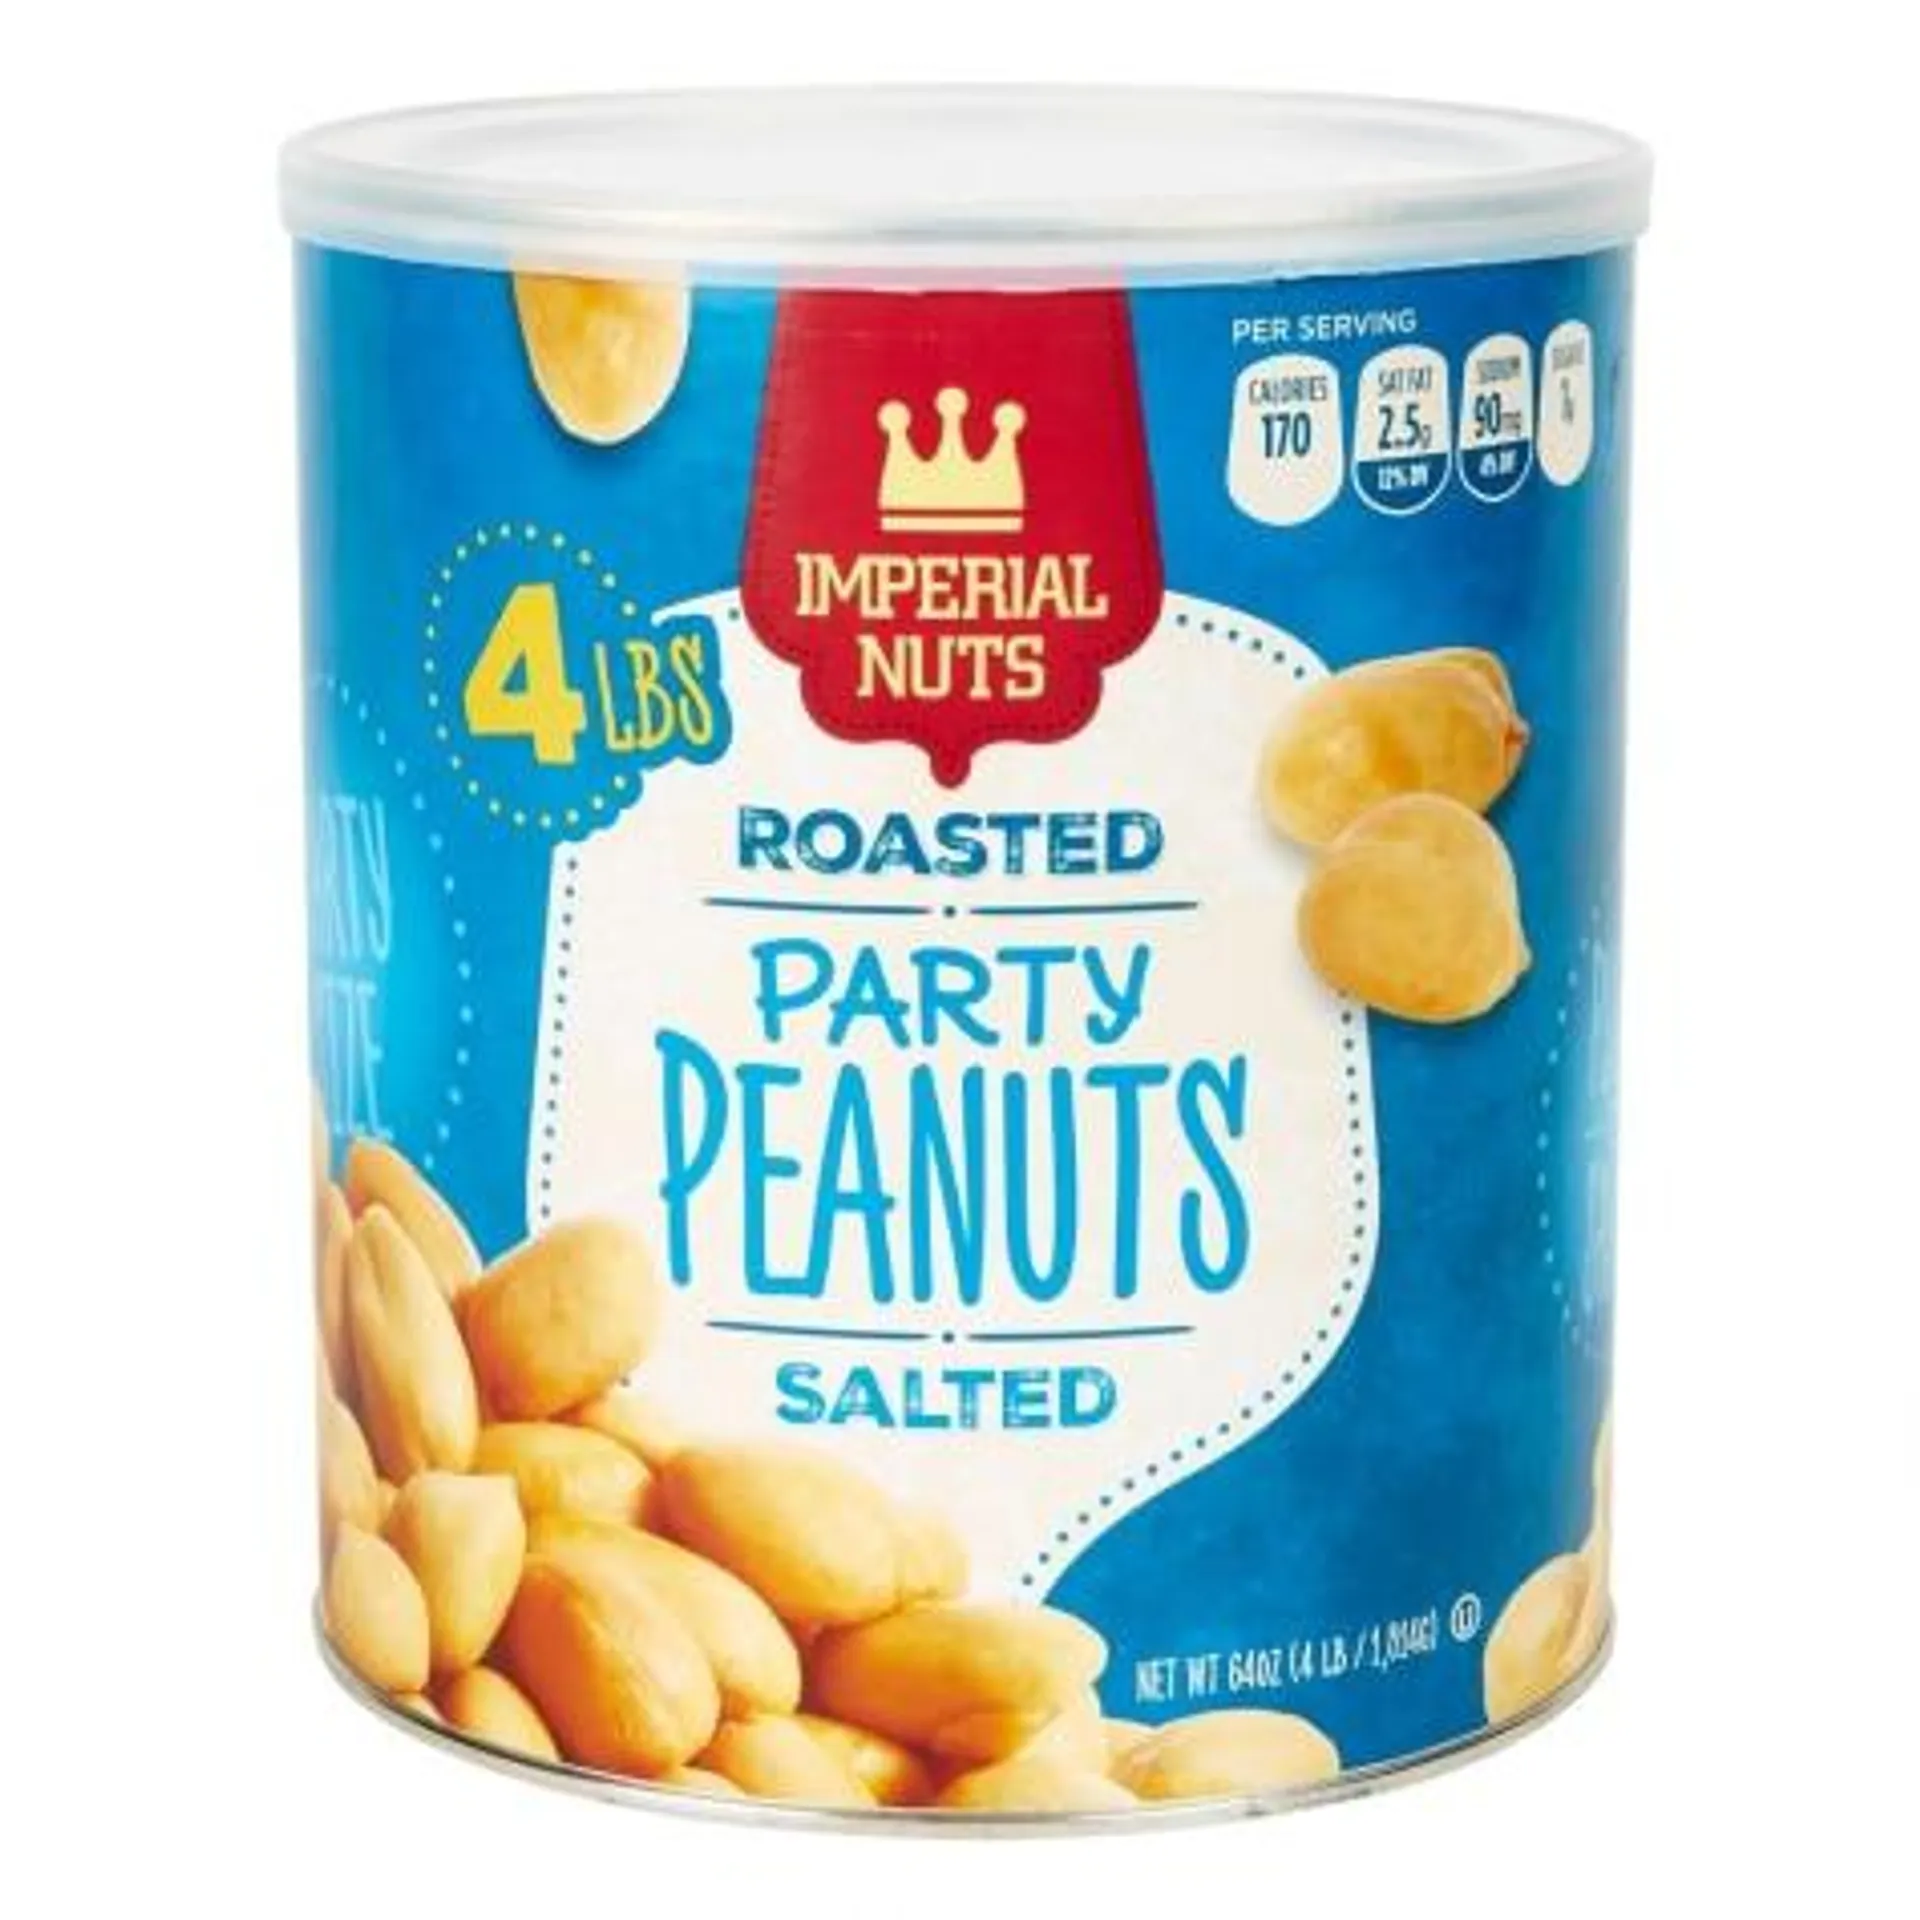 Imperial Nuts Roasted & Salted Party Peanuts, 64 oz